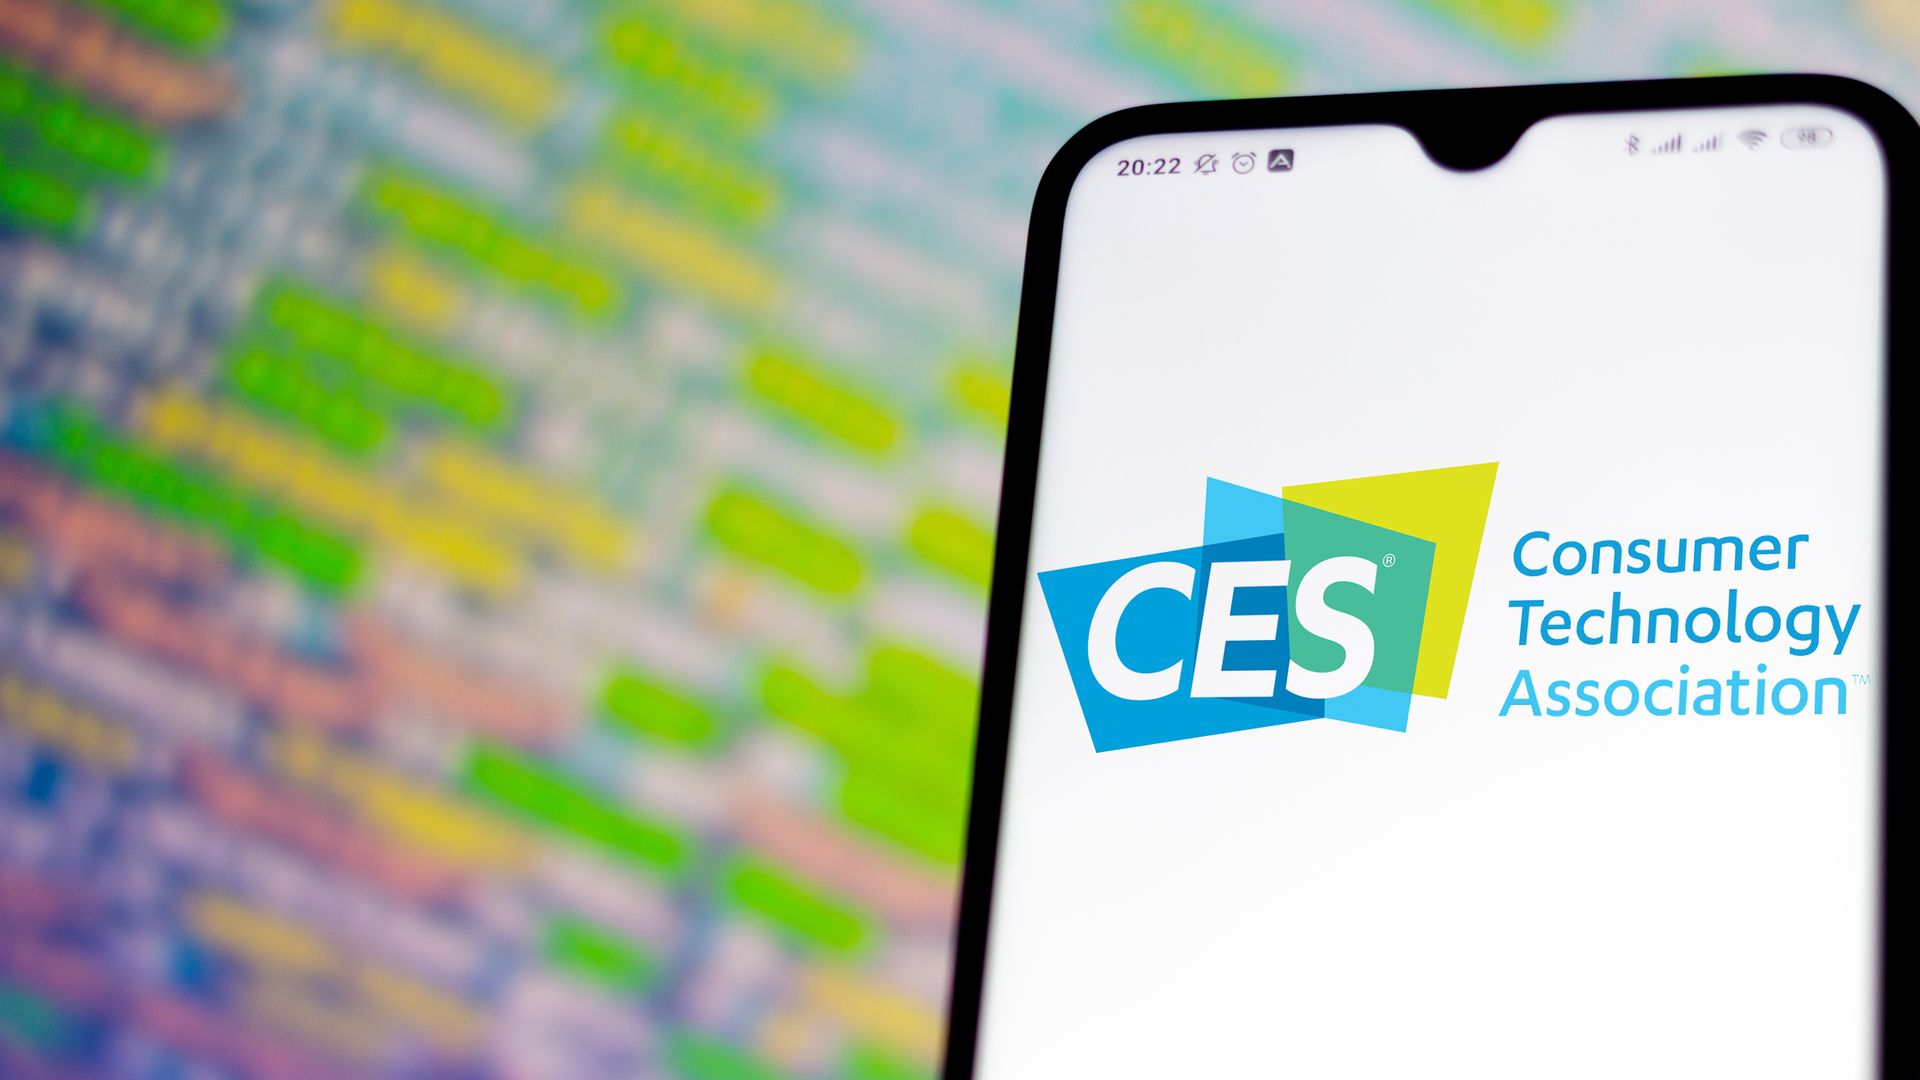 A photo illustration of the CES logo displayed on a smartphone.